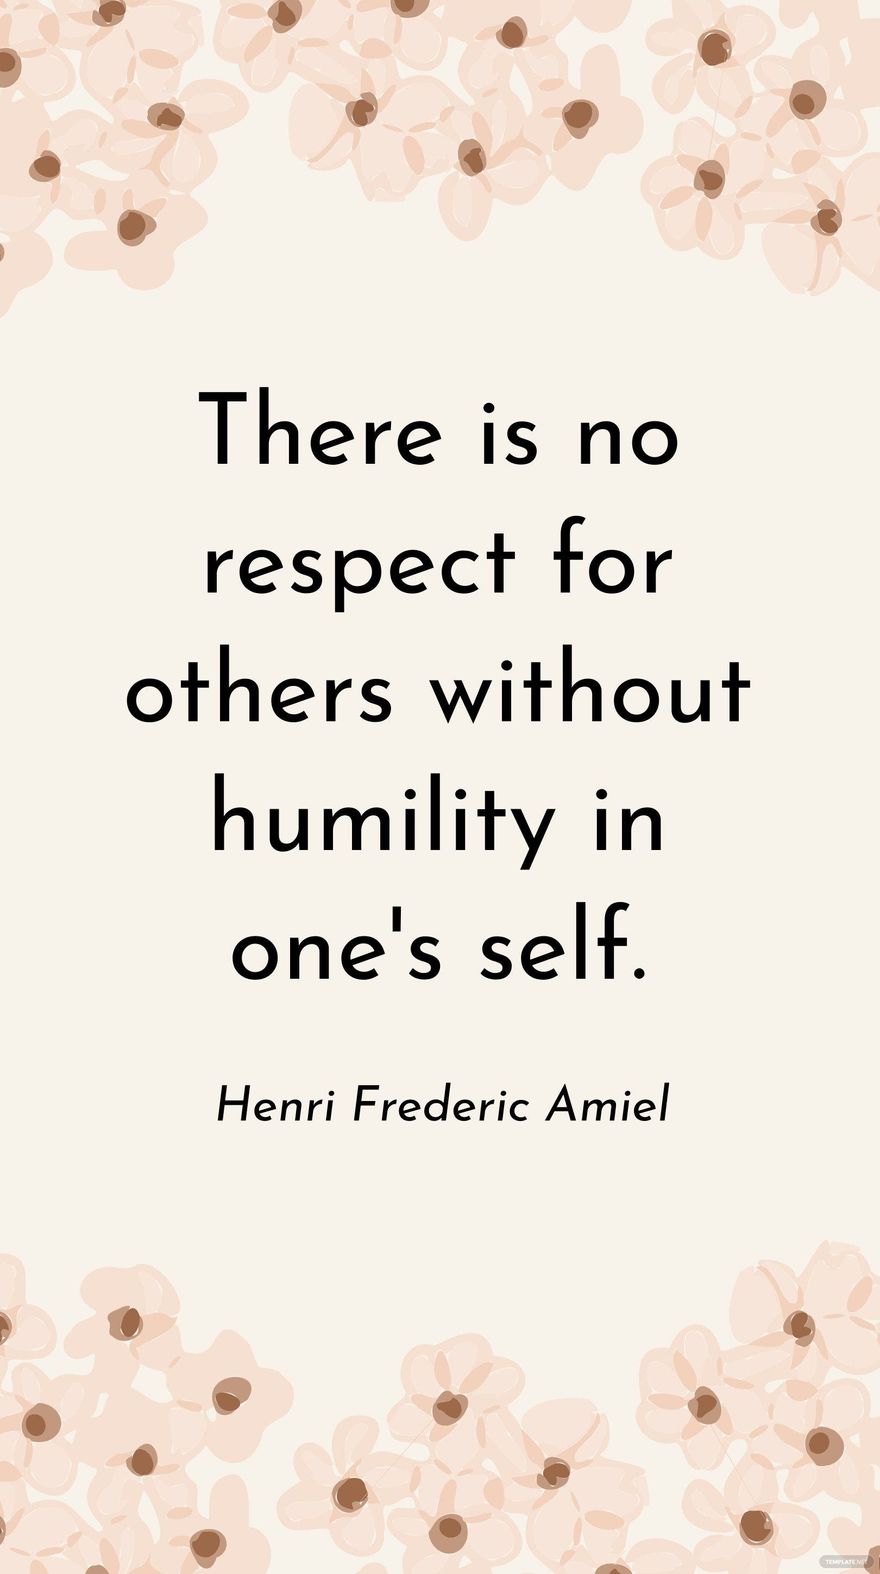 Henri Frederic Amiel - There is no respect for others without humility in one's self. in JPG